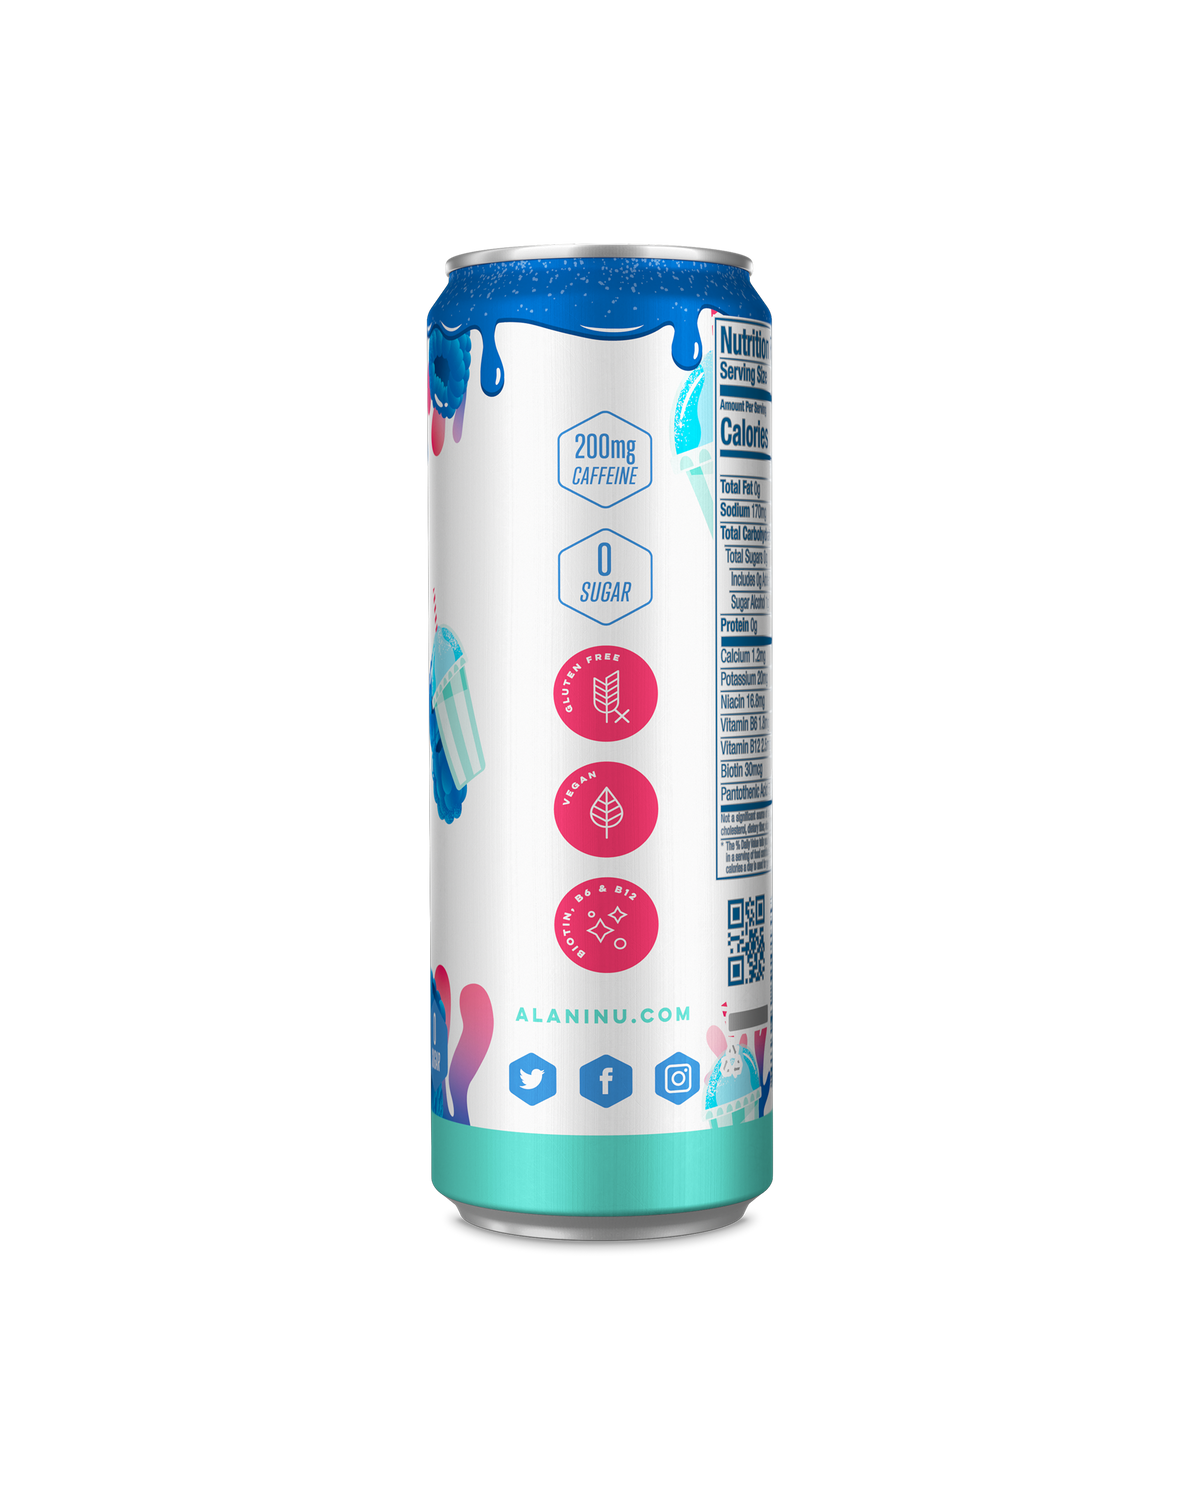 A side view of Energy Drink in Blue Slush flavor showcasing detials of product.